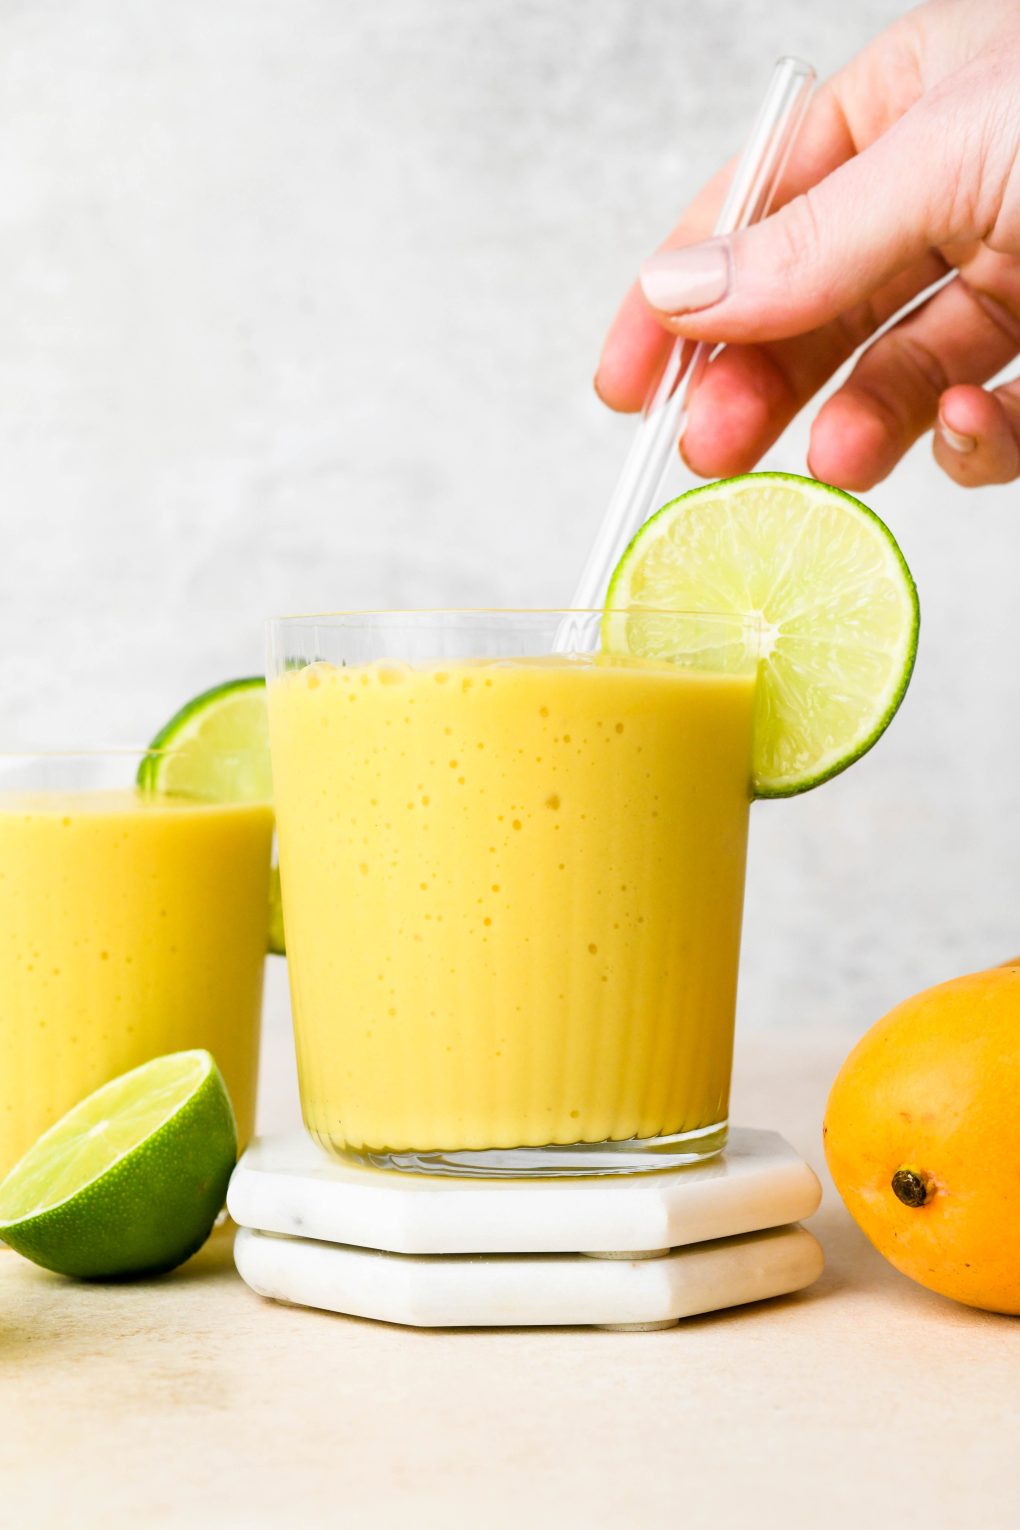 A hand placing a glass straw in a glass of mango smoothie.